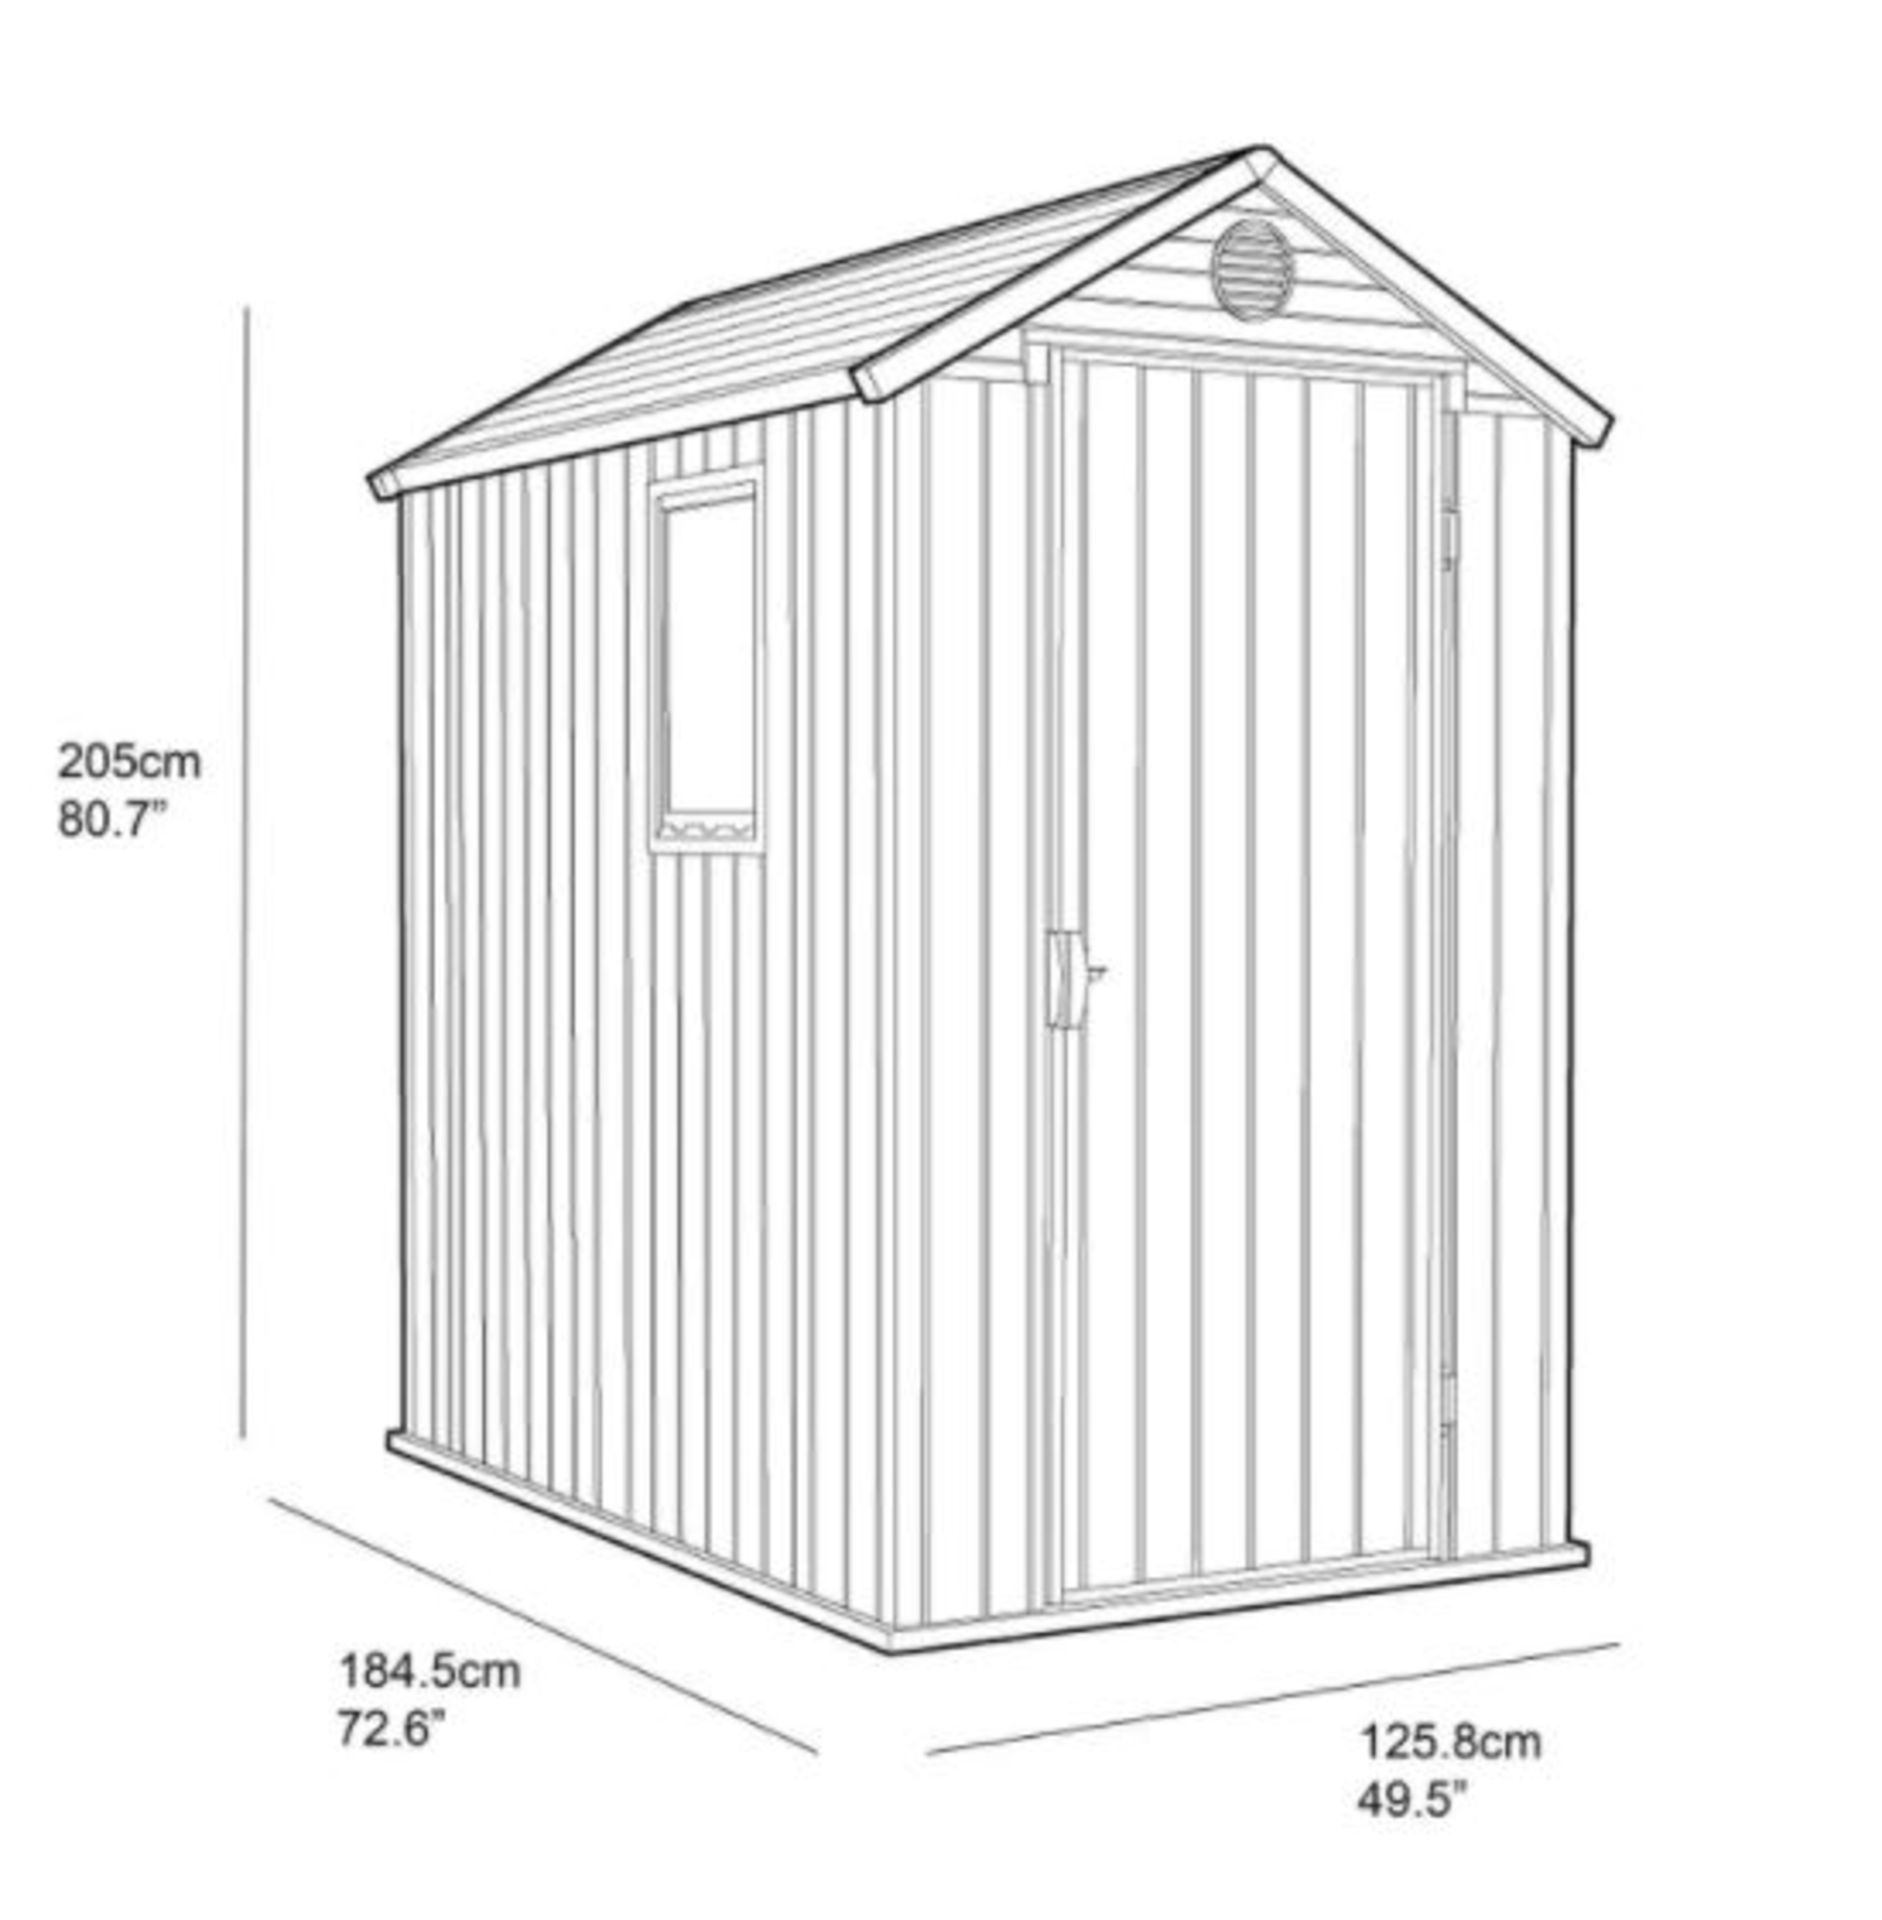 (R16) 1x Keter Darwin 4x6 Outdoor Plastic Garden Shed Brown RRP £340. Dimensions (H)205 x (W)125. - Image 7 of 8